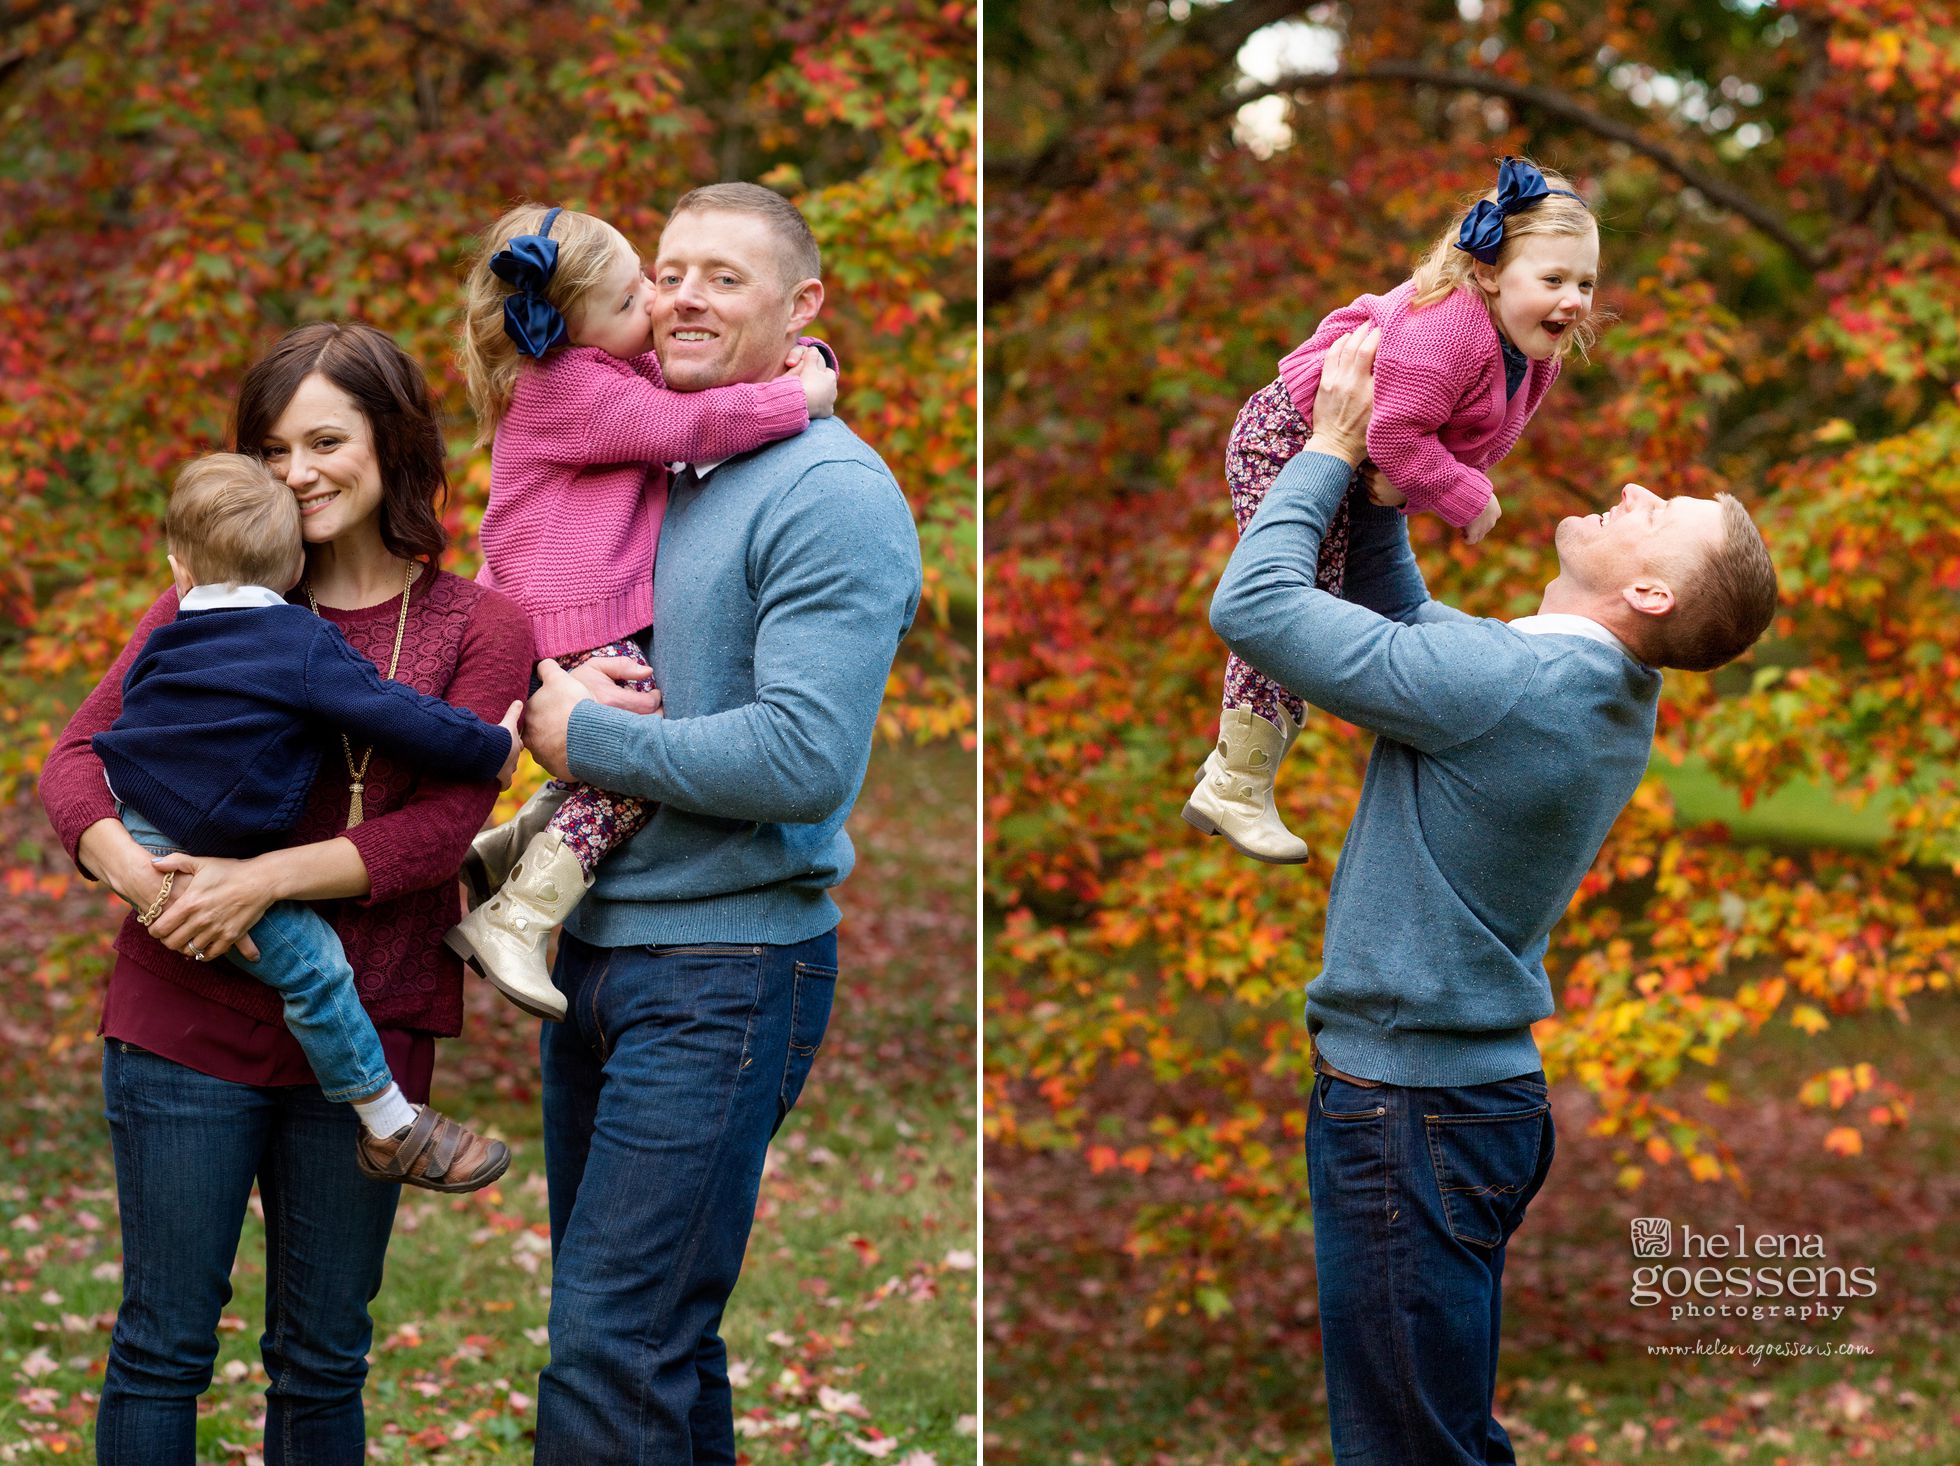 a family of four playing at the park in the fall